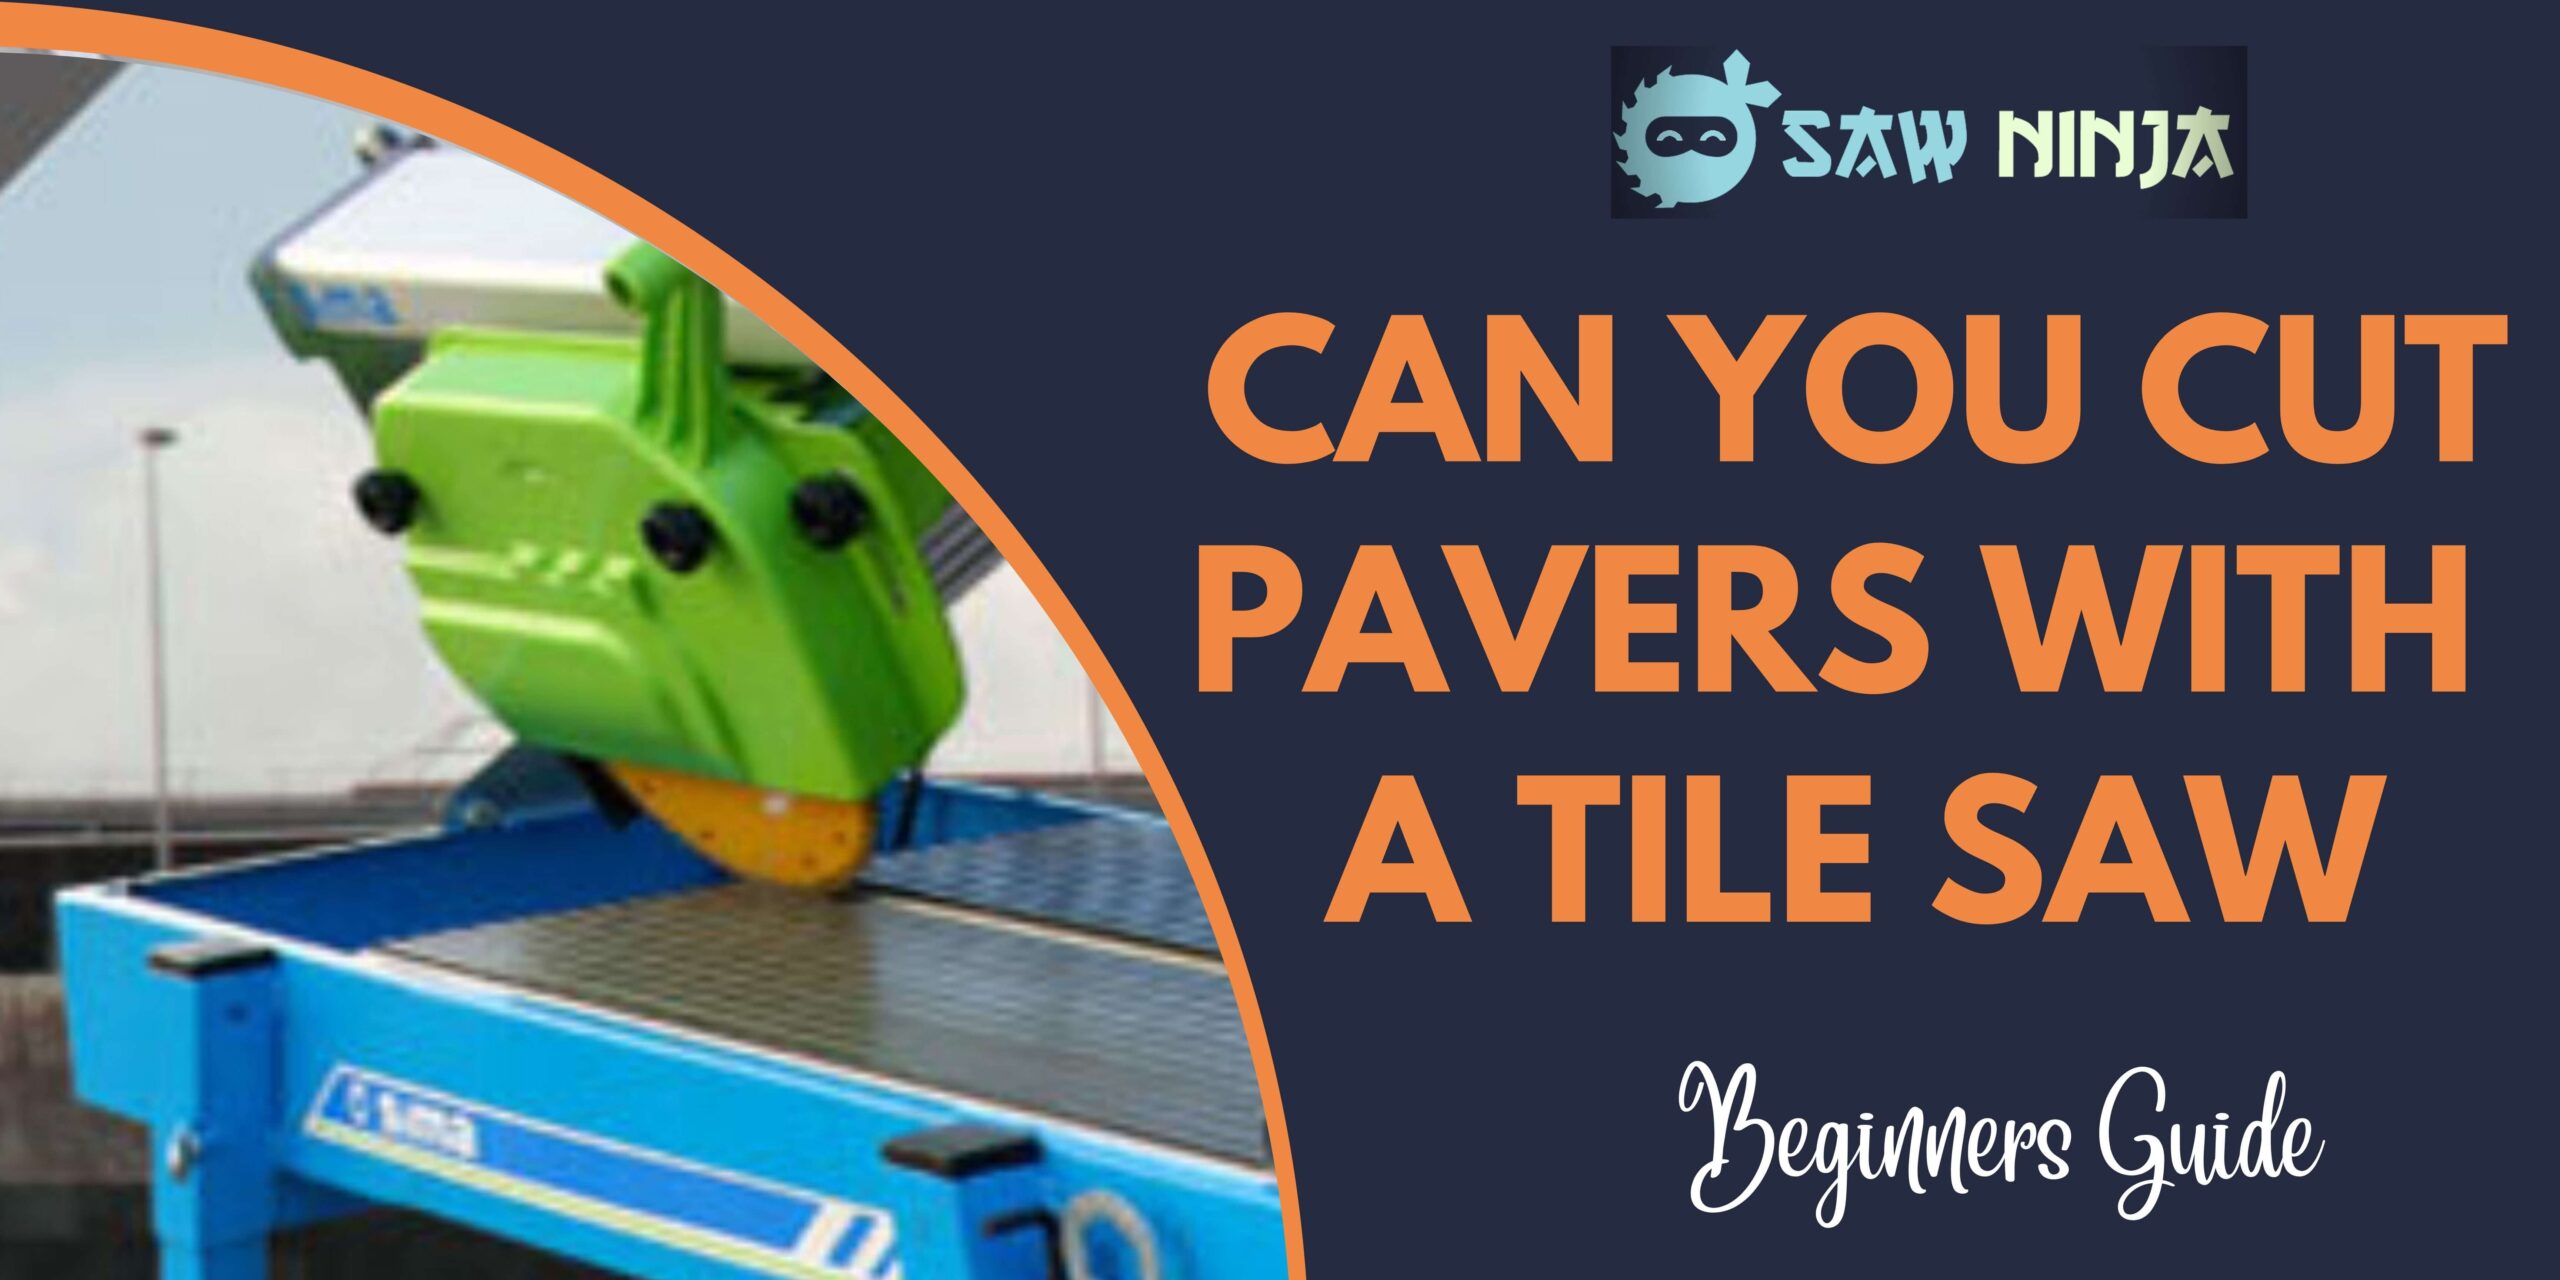 Can You Cut Pavers With a Tile Saw